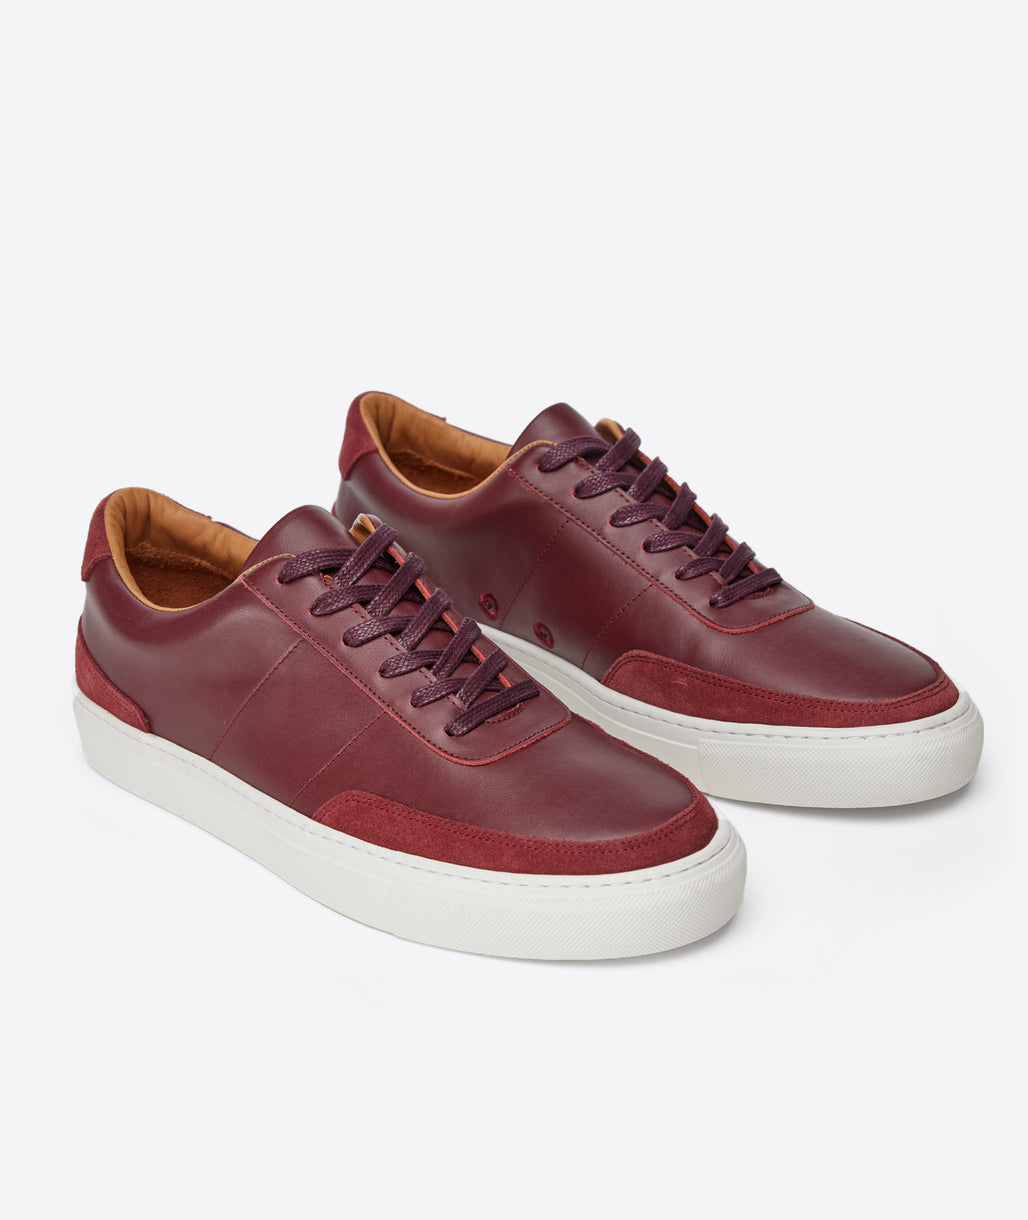 Contrast Leather Lace-Up